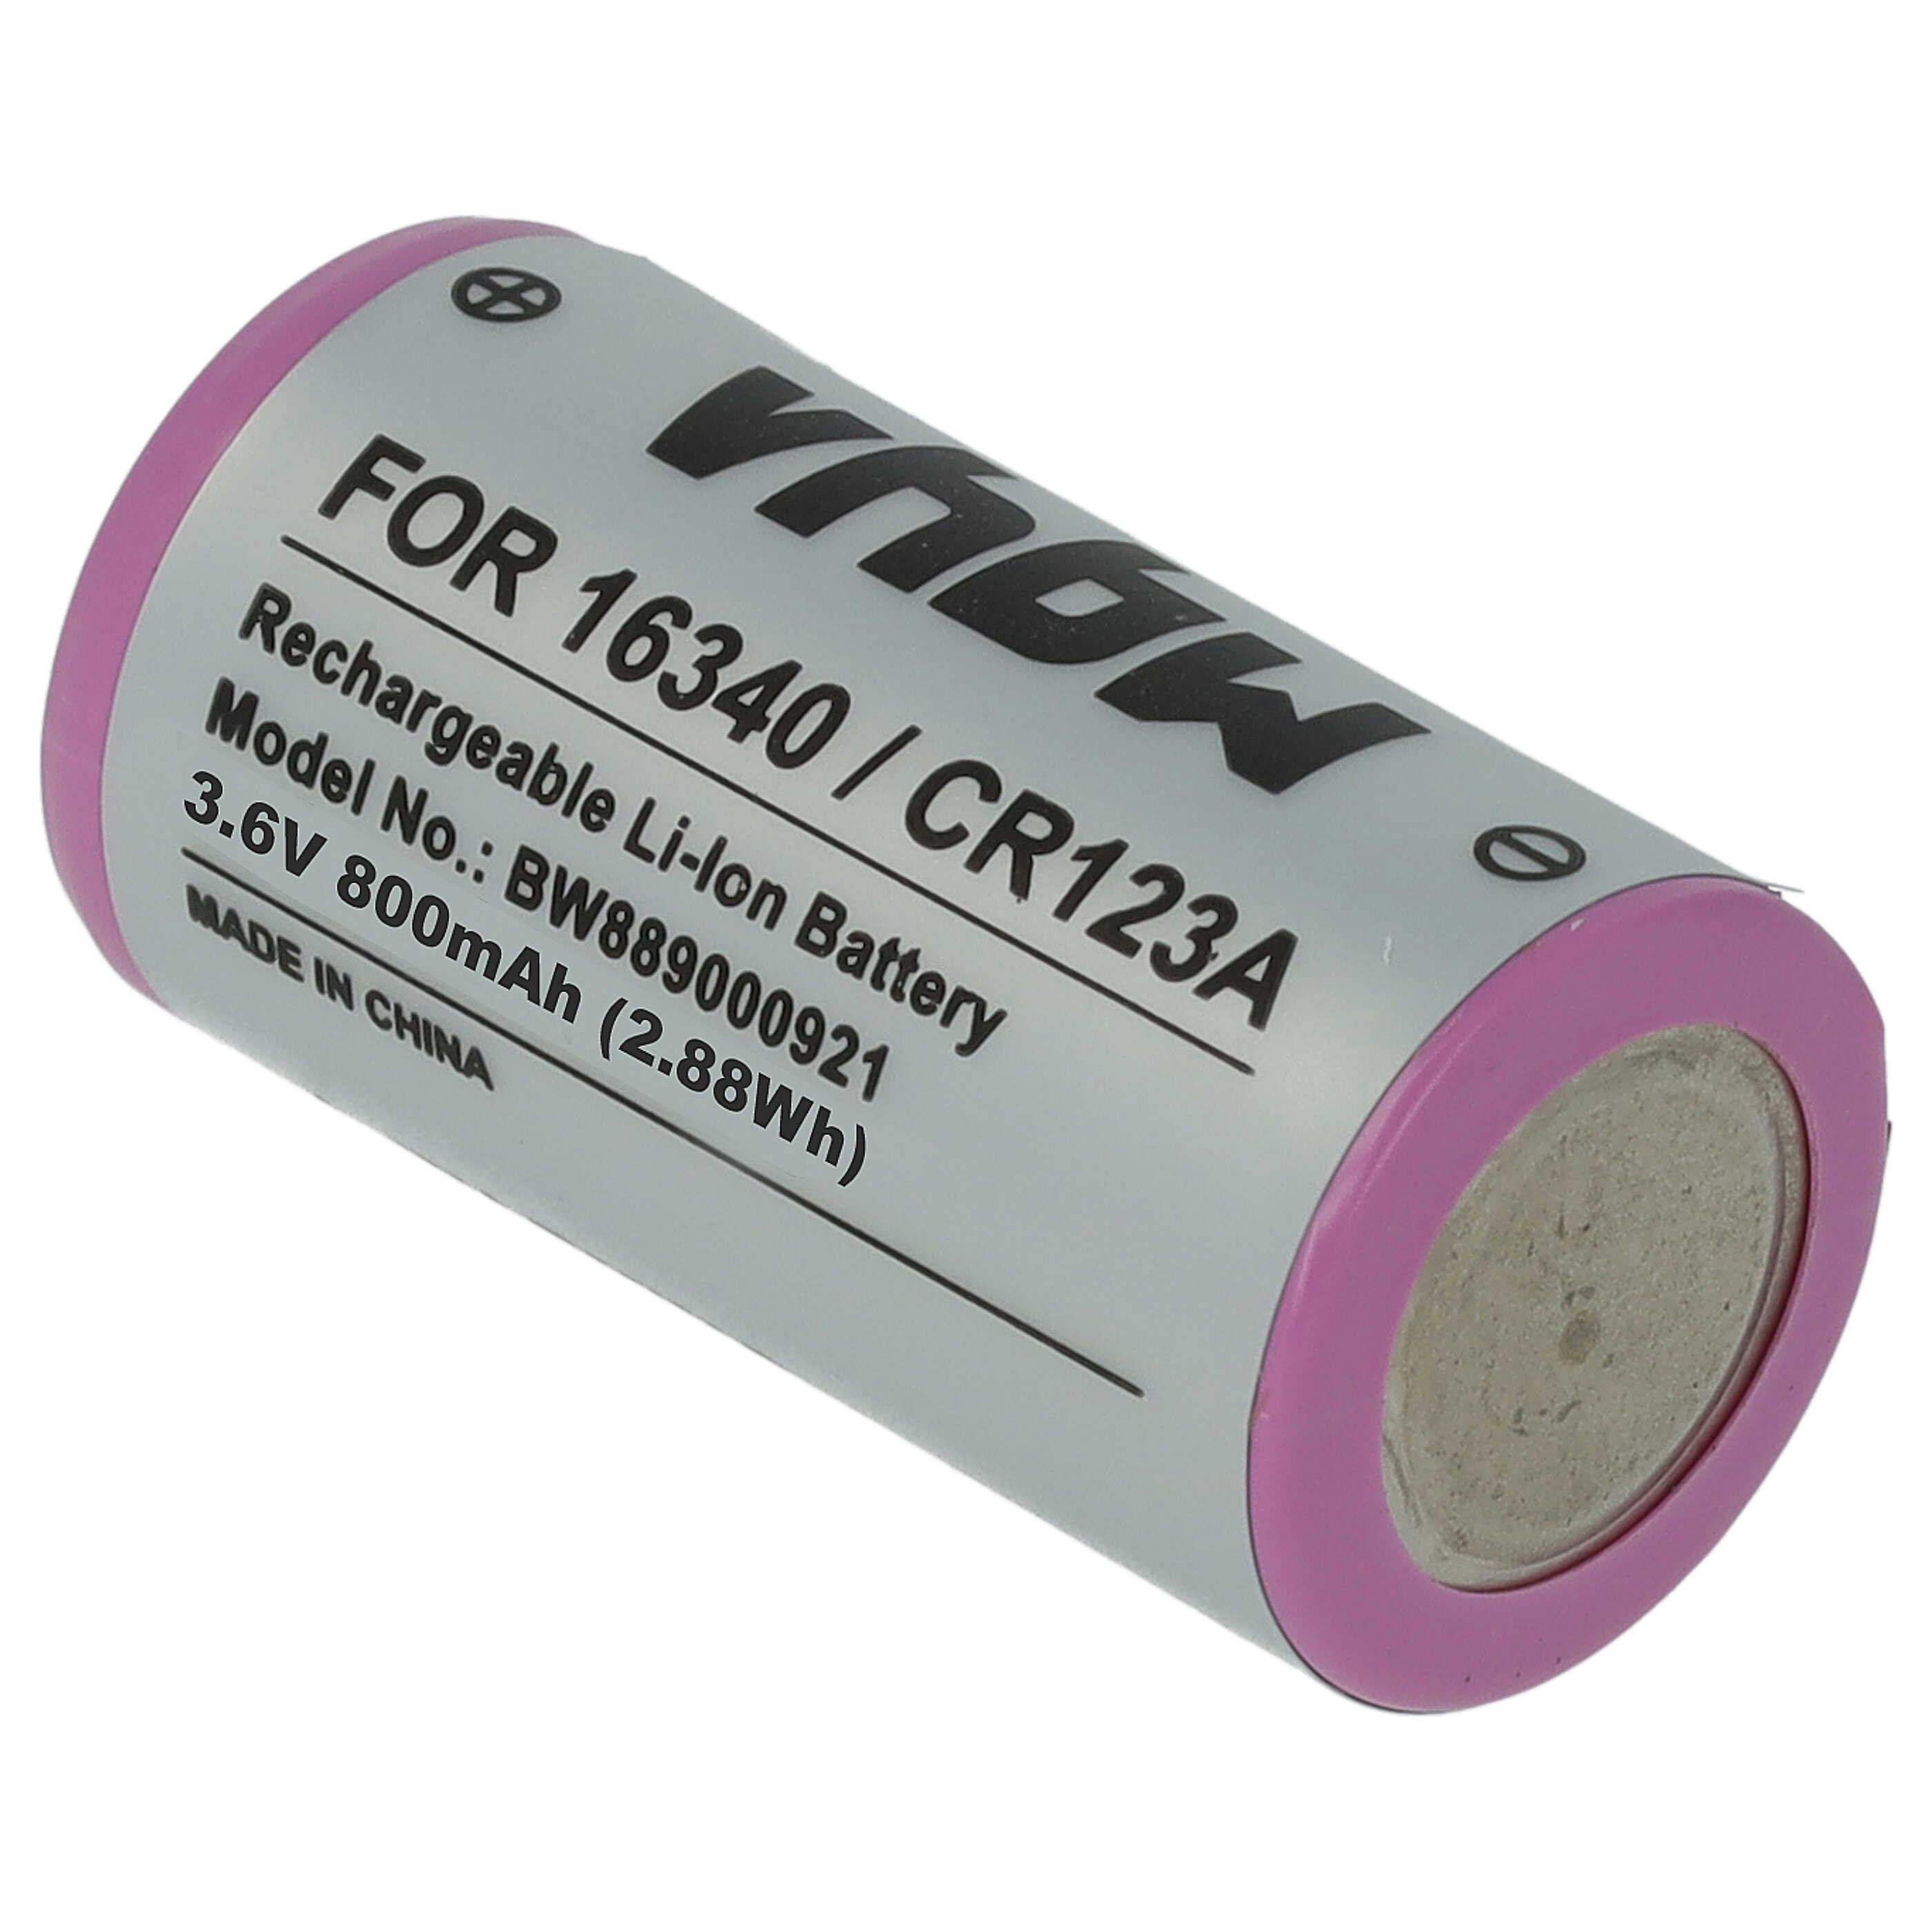 Universal Battery (2 Units) Replacement for 16340, CR123R, CR17335, CR17345, CR123A - 800mAh 3.6V Li-Ion